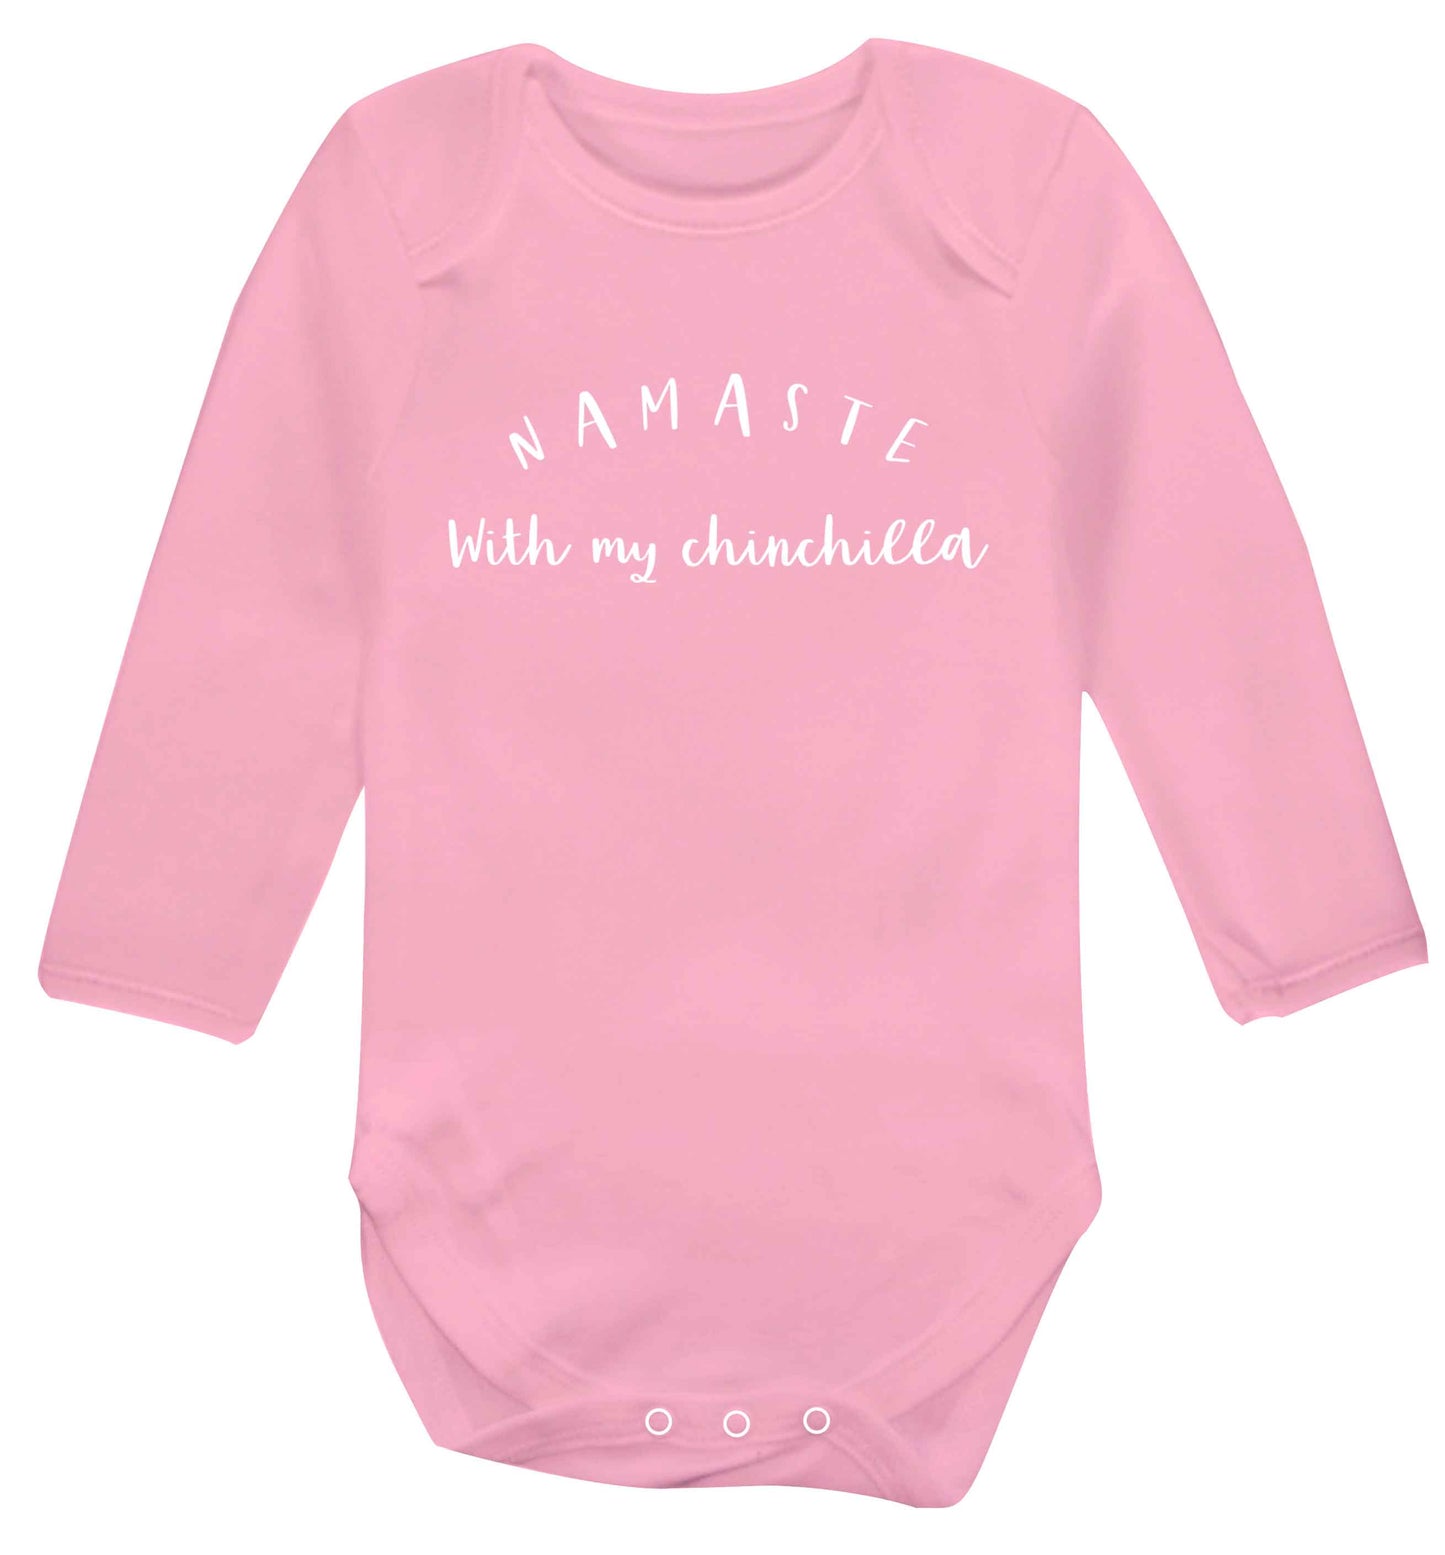 Namaste with my chinchilla Baby Vest long sleeved pale pink 6-12 months